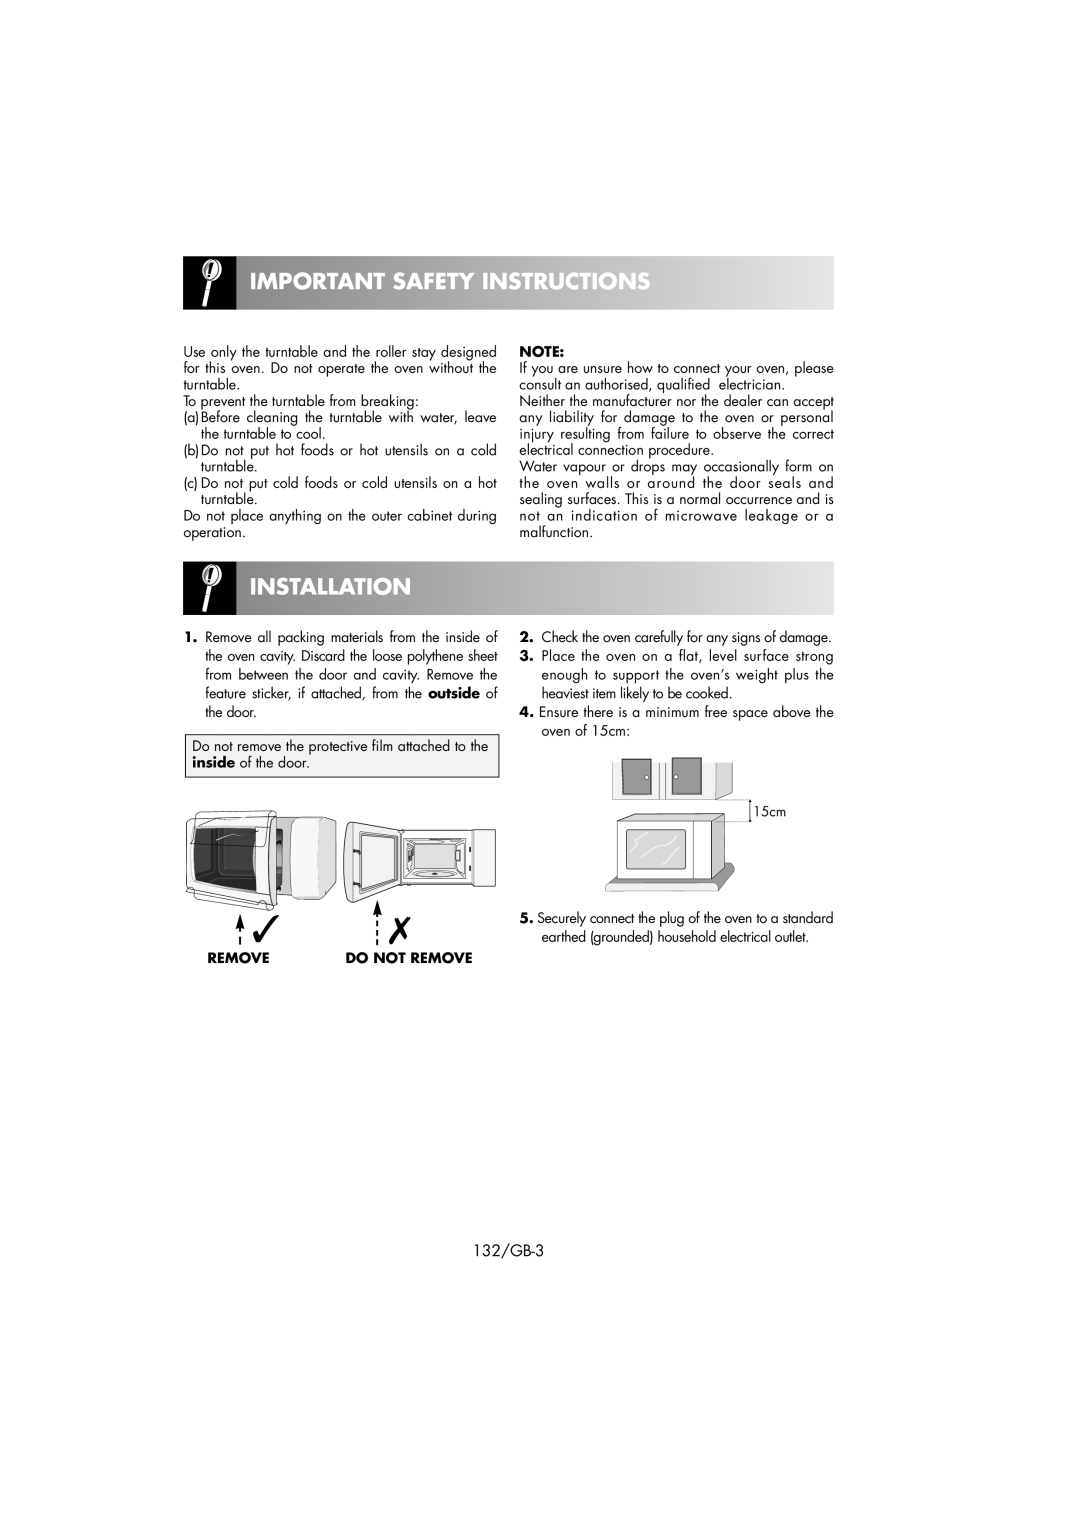 Sharp R-239 operation manual Installation, Important Safety Instructions, 132/GB-3 